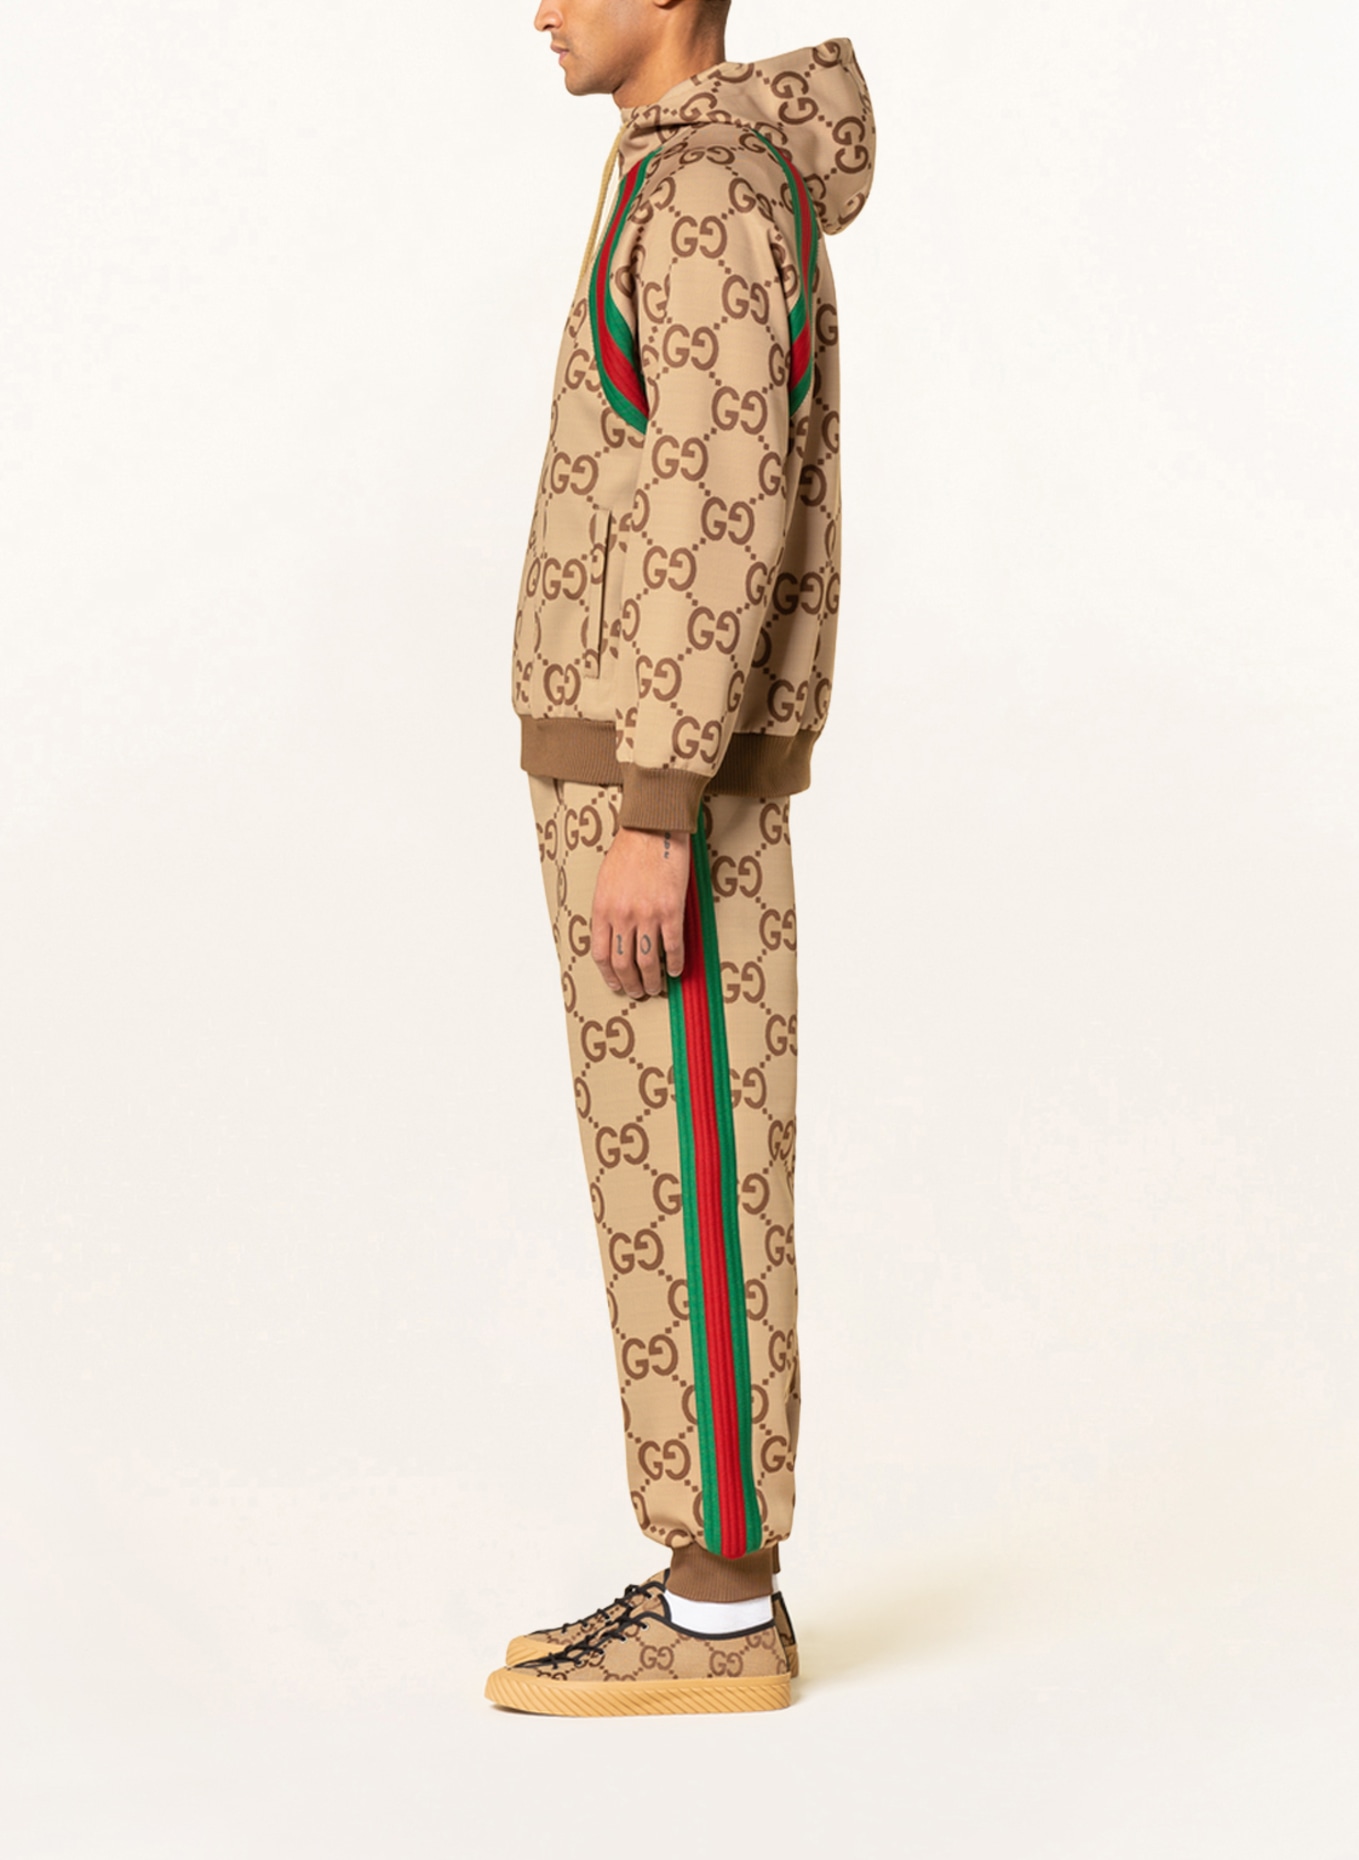 GG jersey cotton jacket in black and camel | GUCCI® US